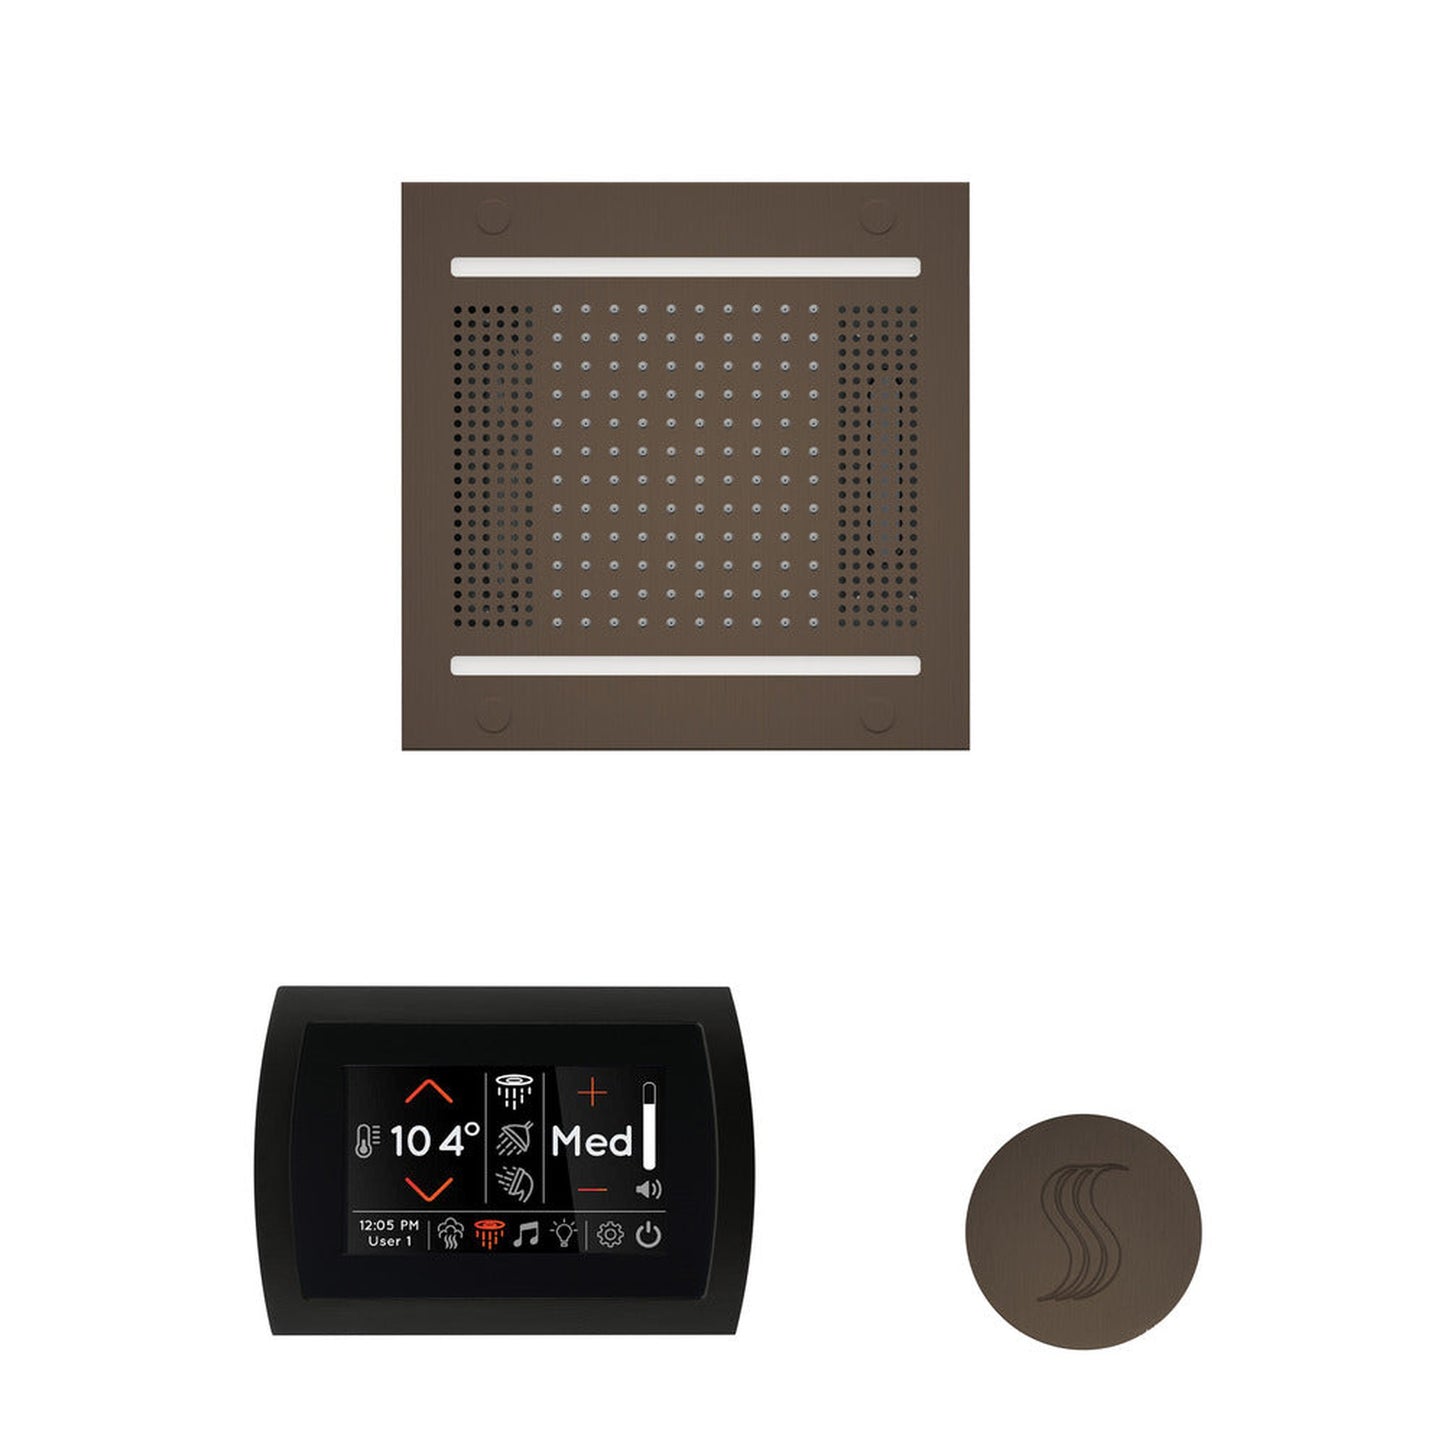 ThermaSol The Wellness Oil Rubbed Bronze Finish Hydrovive14 Steam Package with 5" Flushmount SignaTouch and Round SteamVection